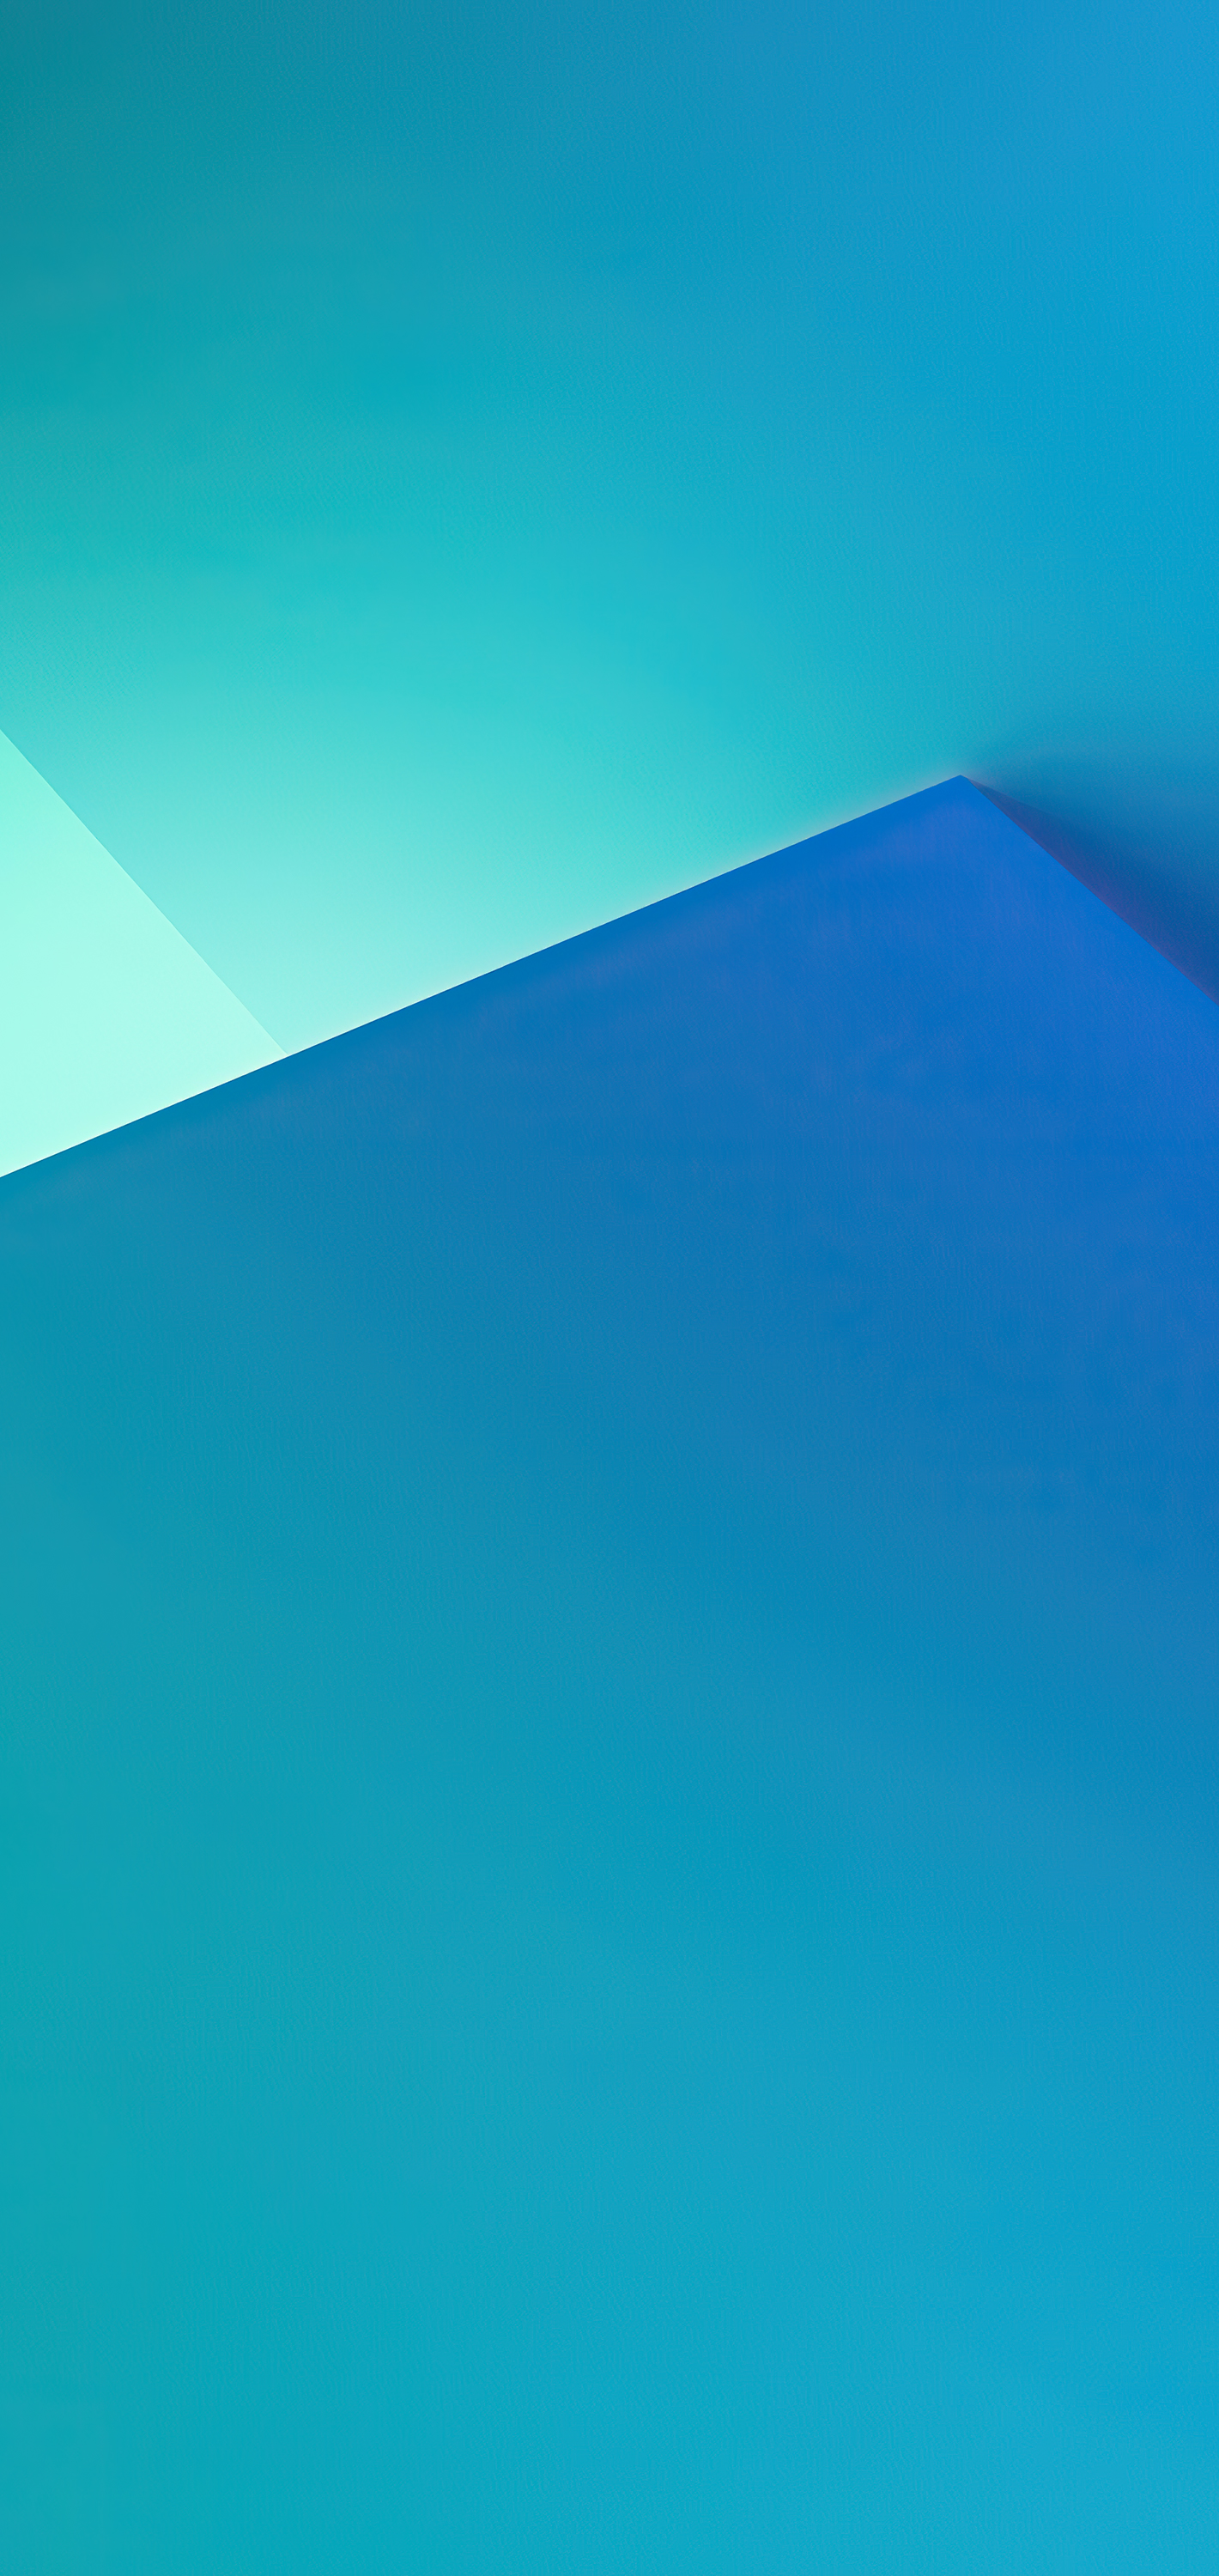 Wallpaper Android, Blue, Rectangle, Slope, Aqua, Background Free Image